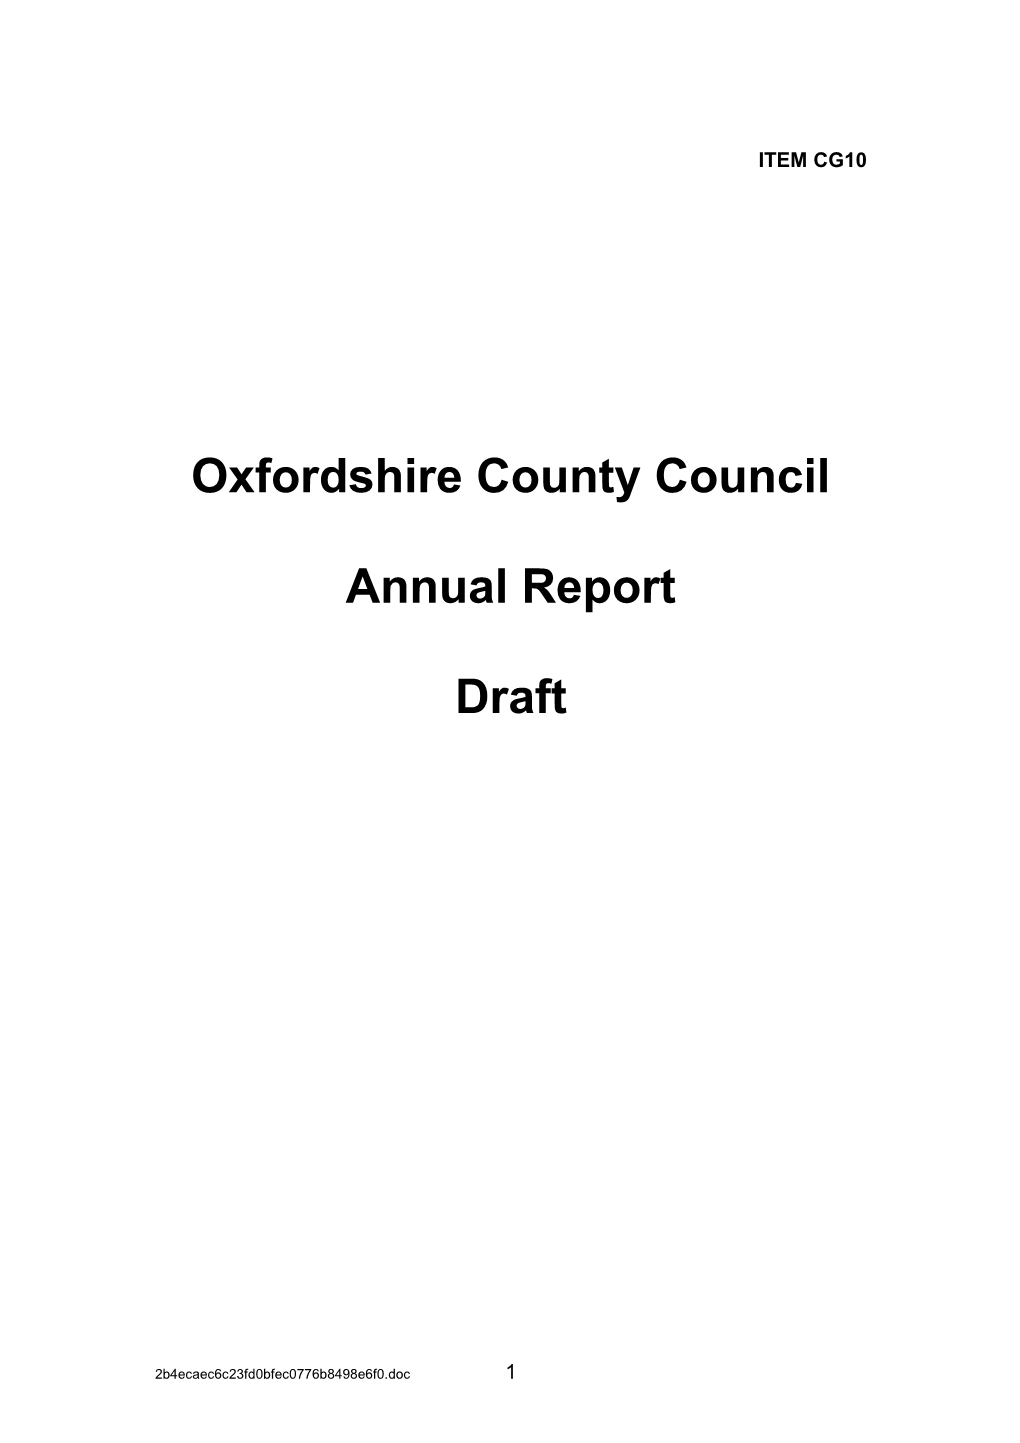 Annual Report Draft Outline